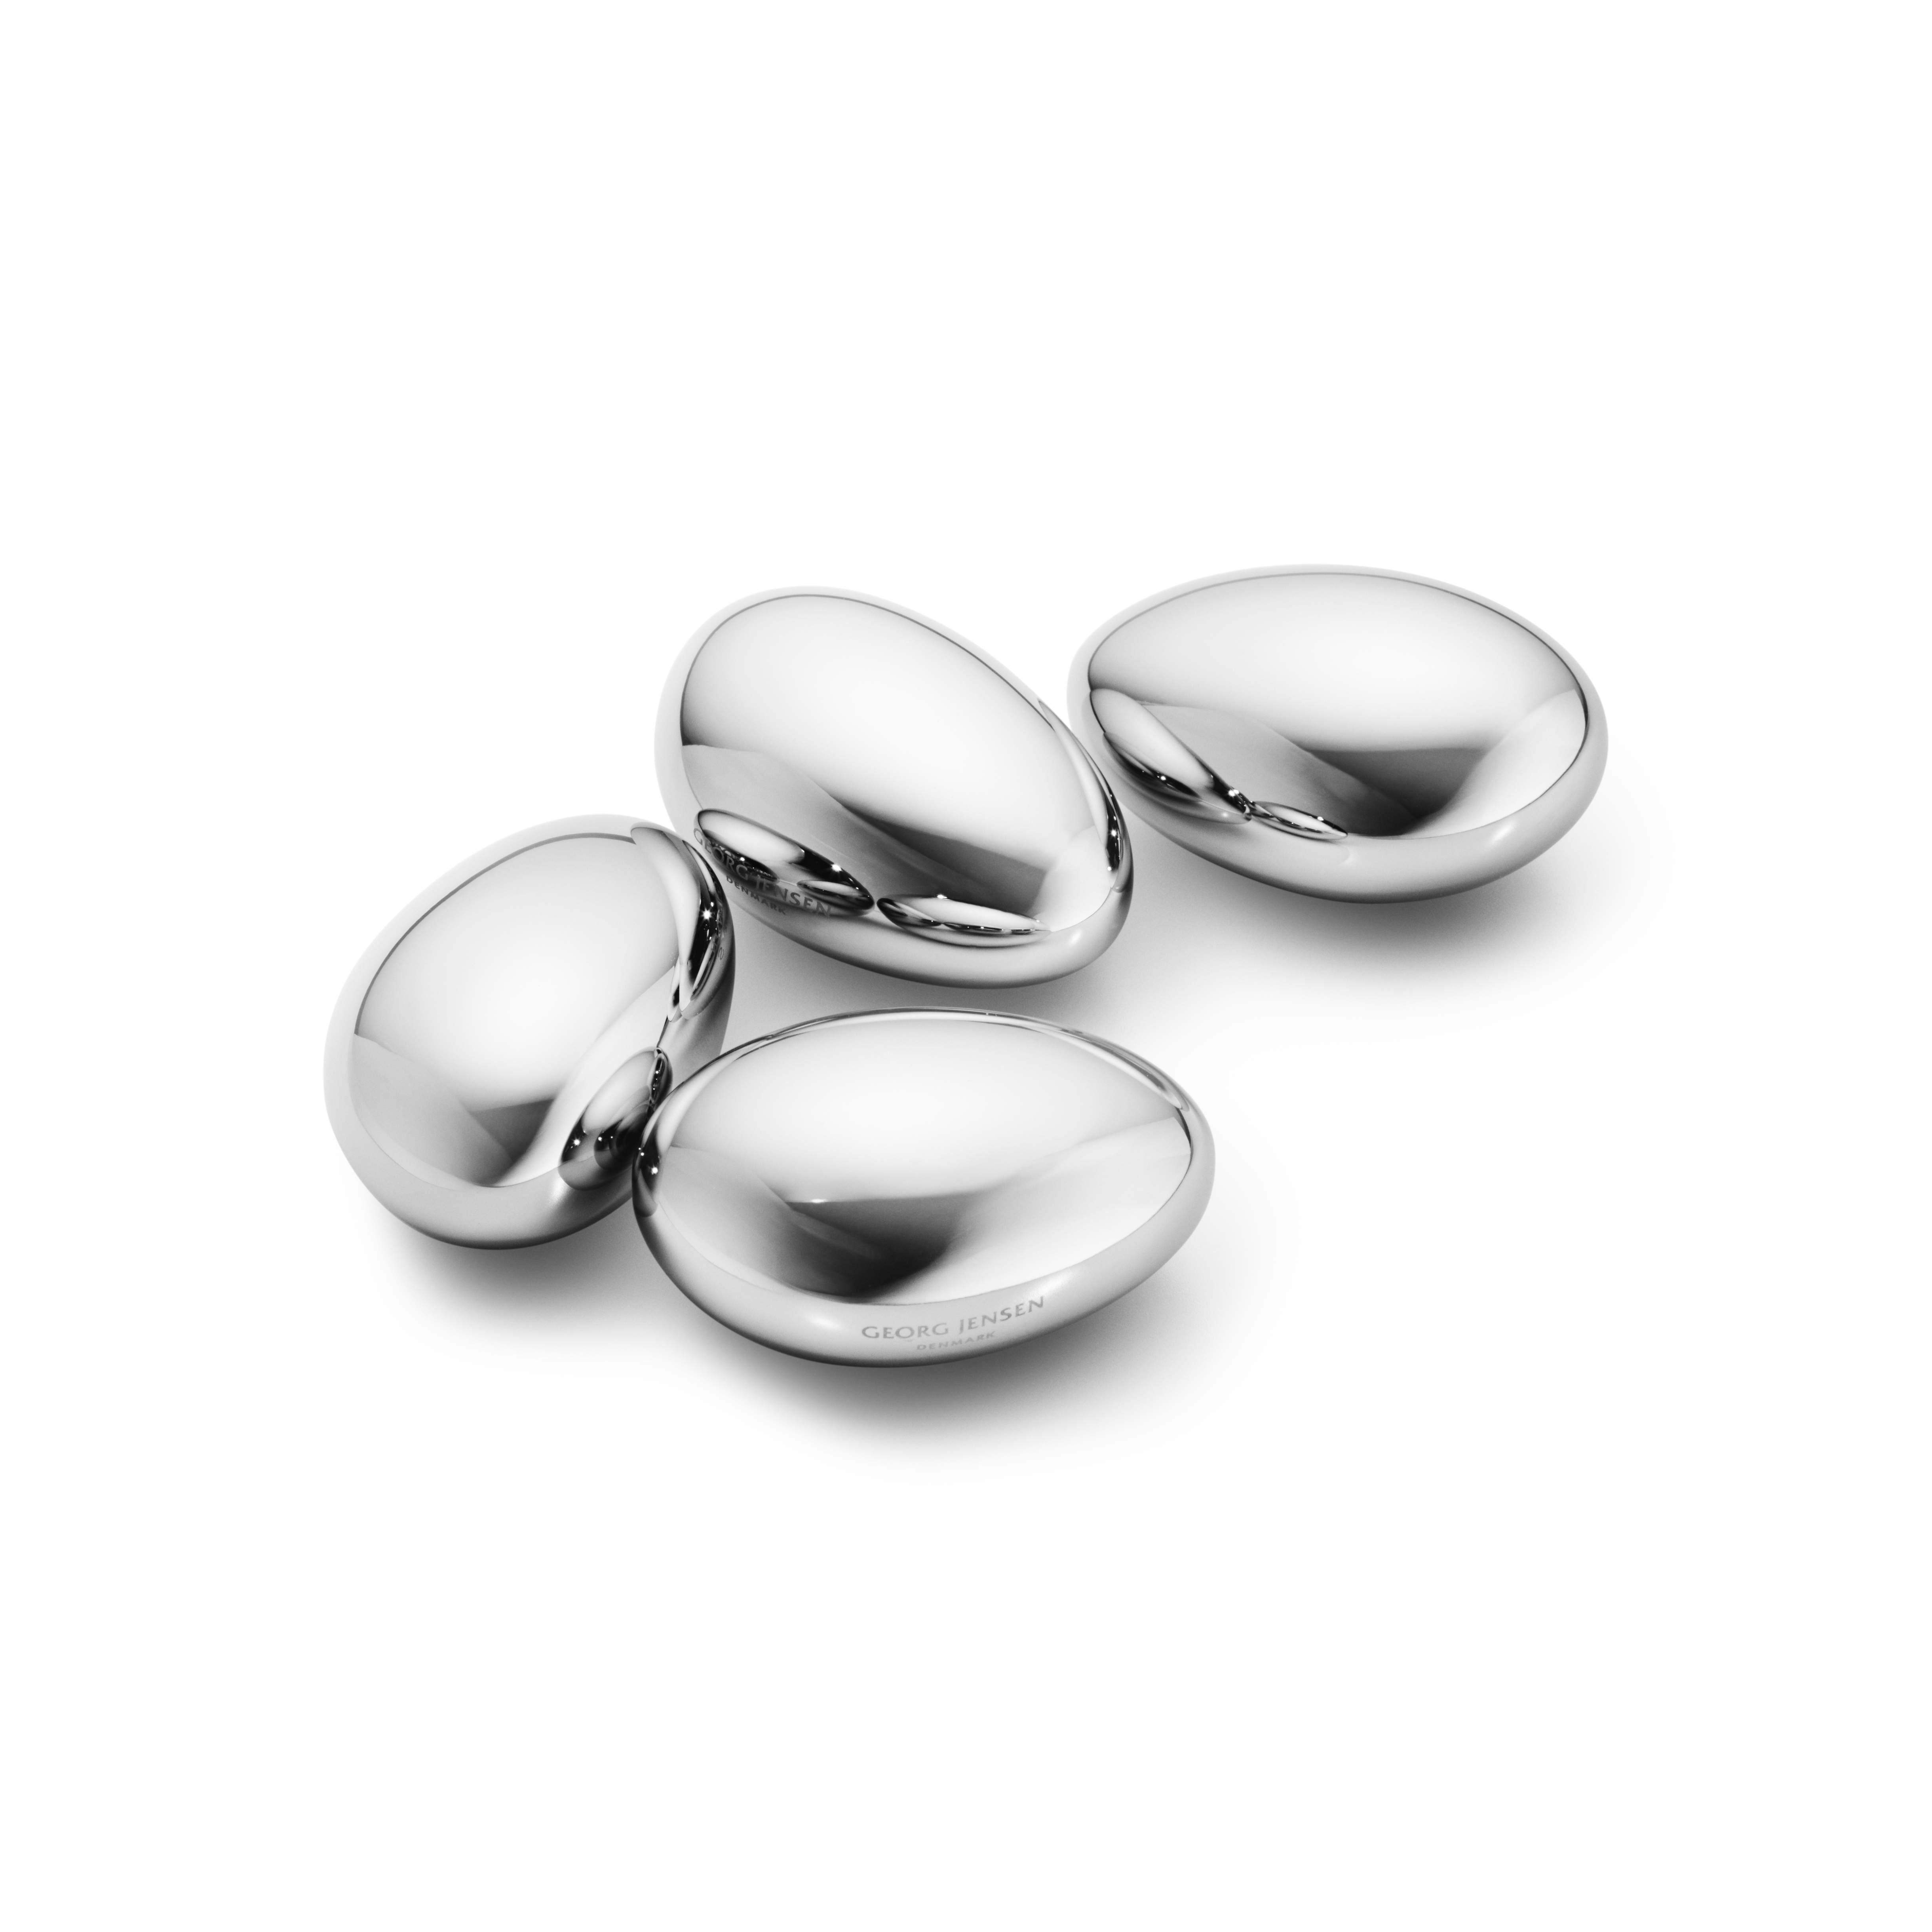 Georg Jensen  Set of 4 Sky Ice Cubes Mirror Polished Stainless Steel